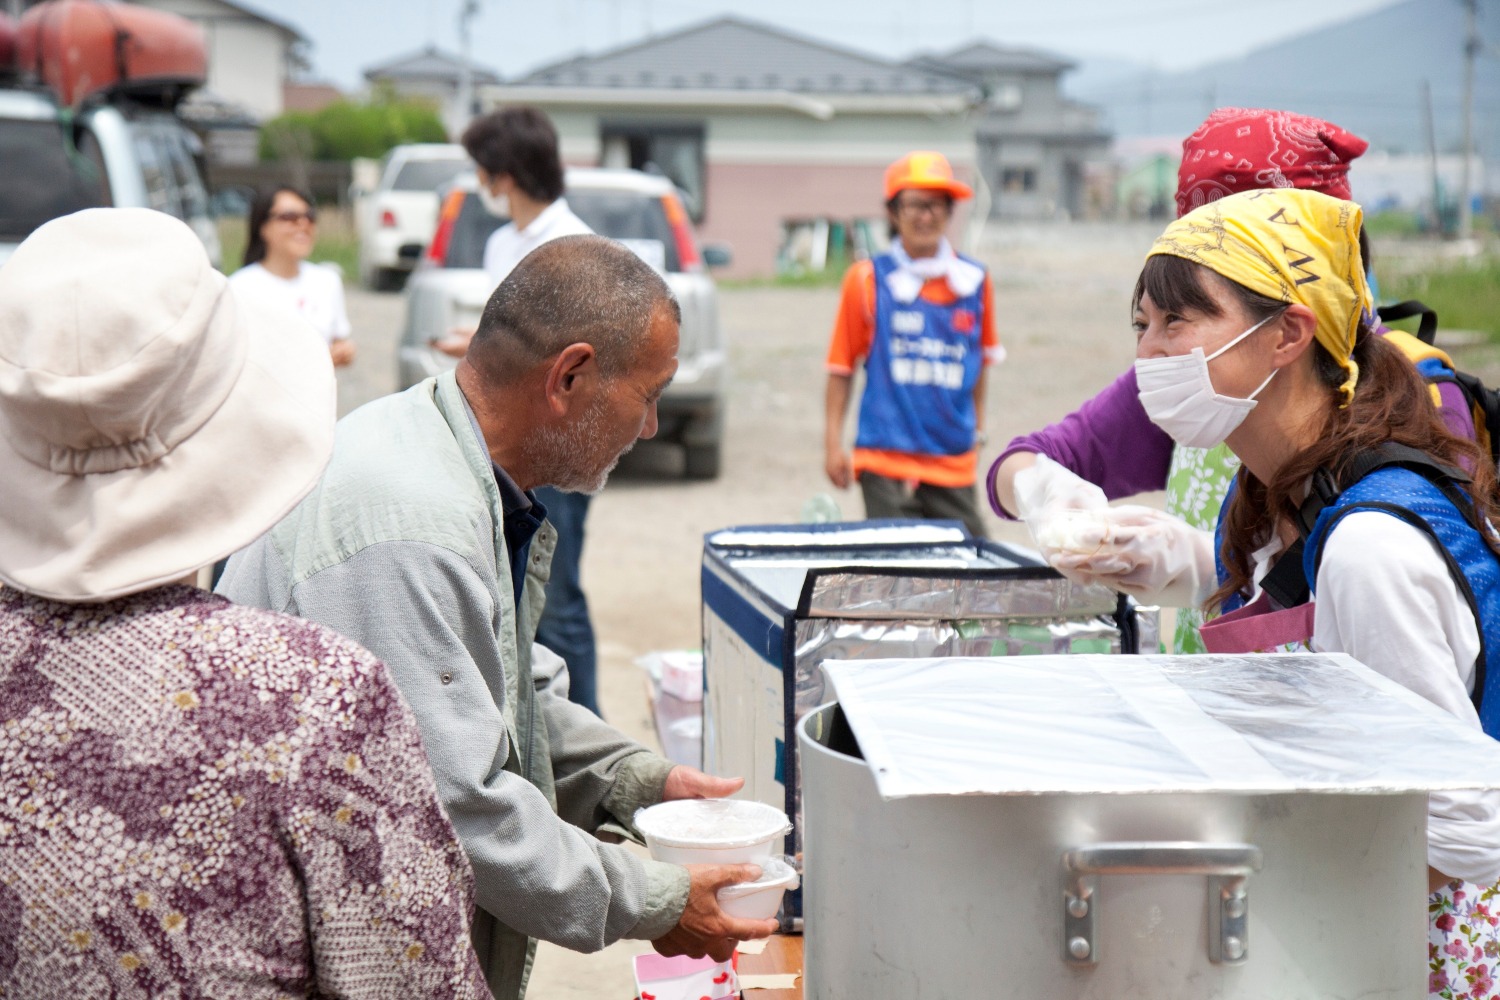 A young Japanese woman wears a mask covering her mouth and nose. She smiles and stands behind a table, which holds a large pot used to cook food. A man with a gray crew-cut and a gray beard looks at her, holding a couple bowls in a sign of respect and thanks.